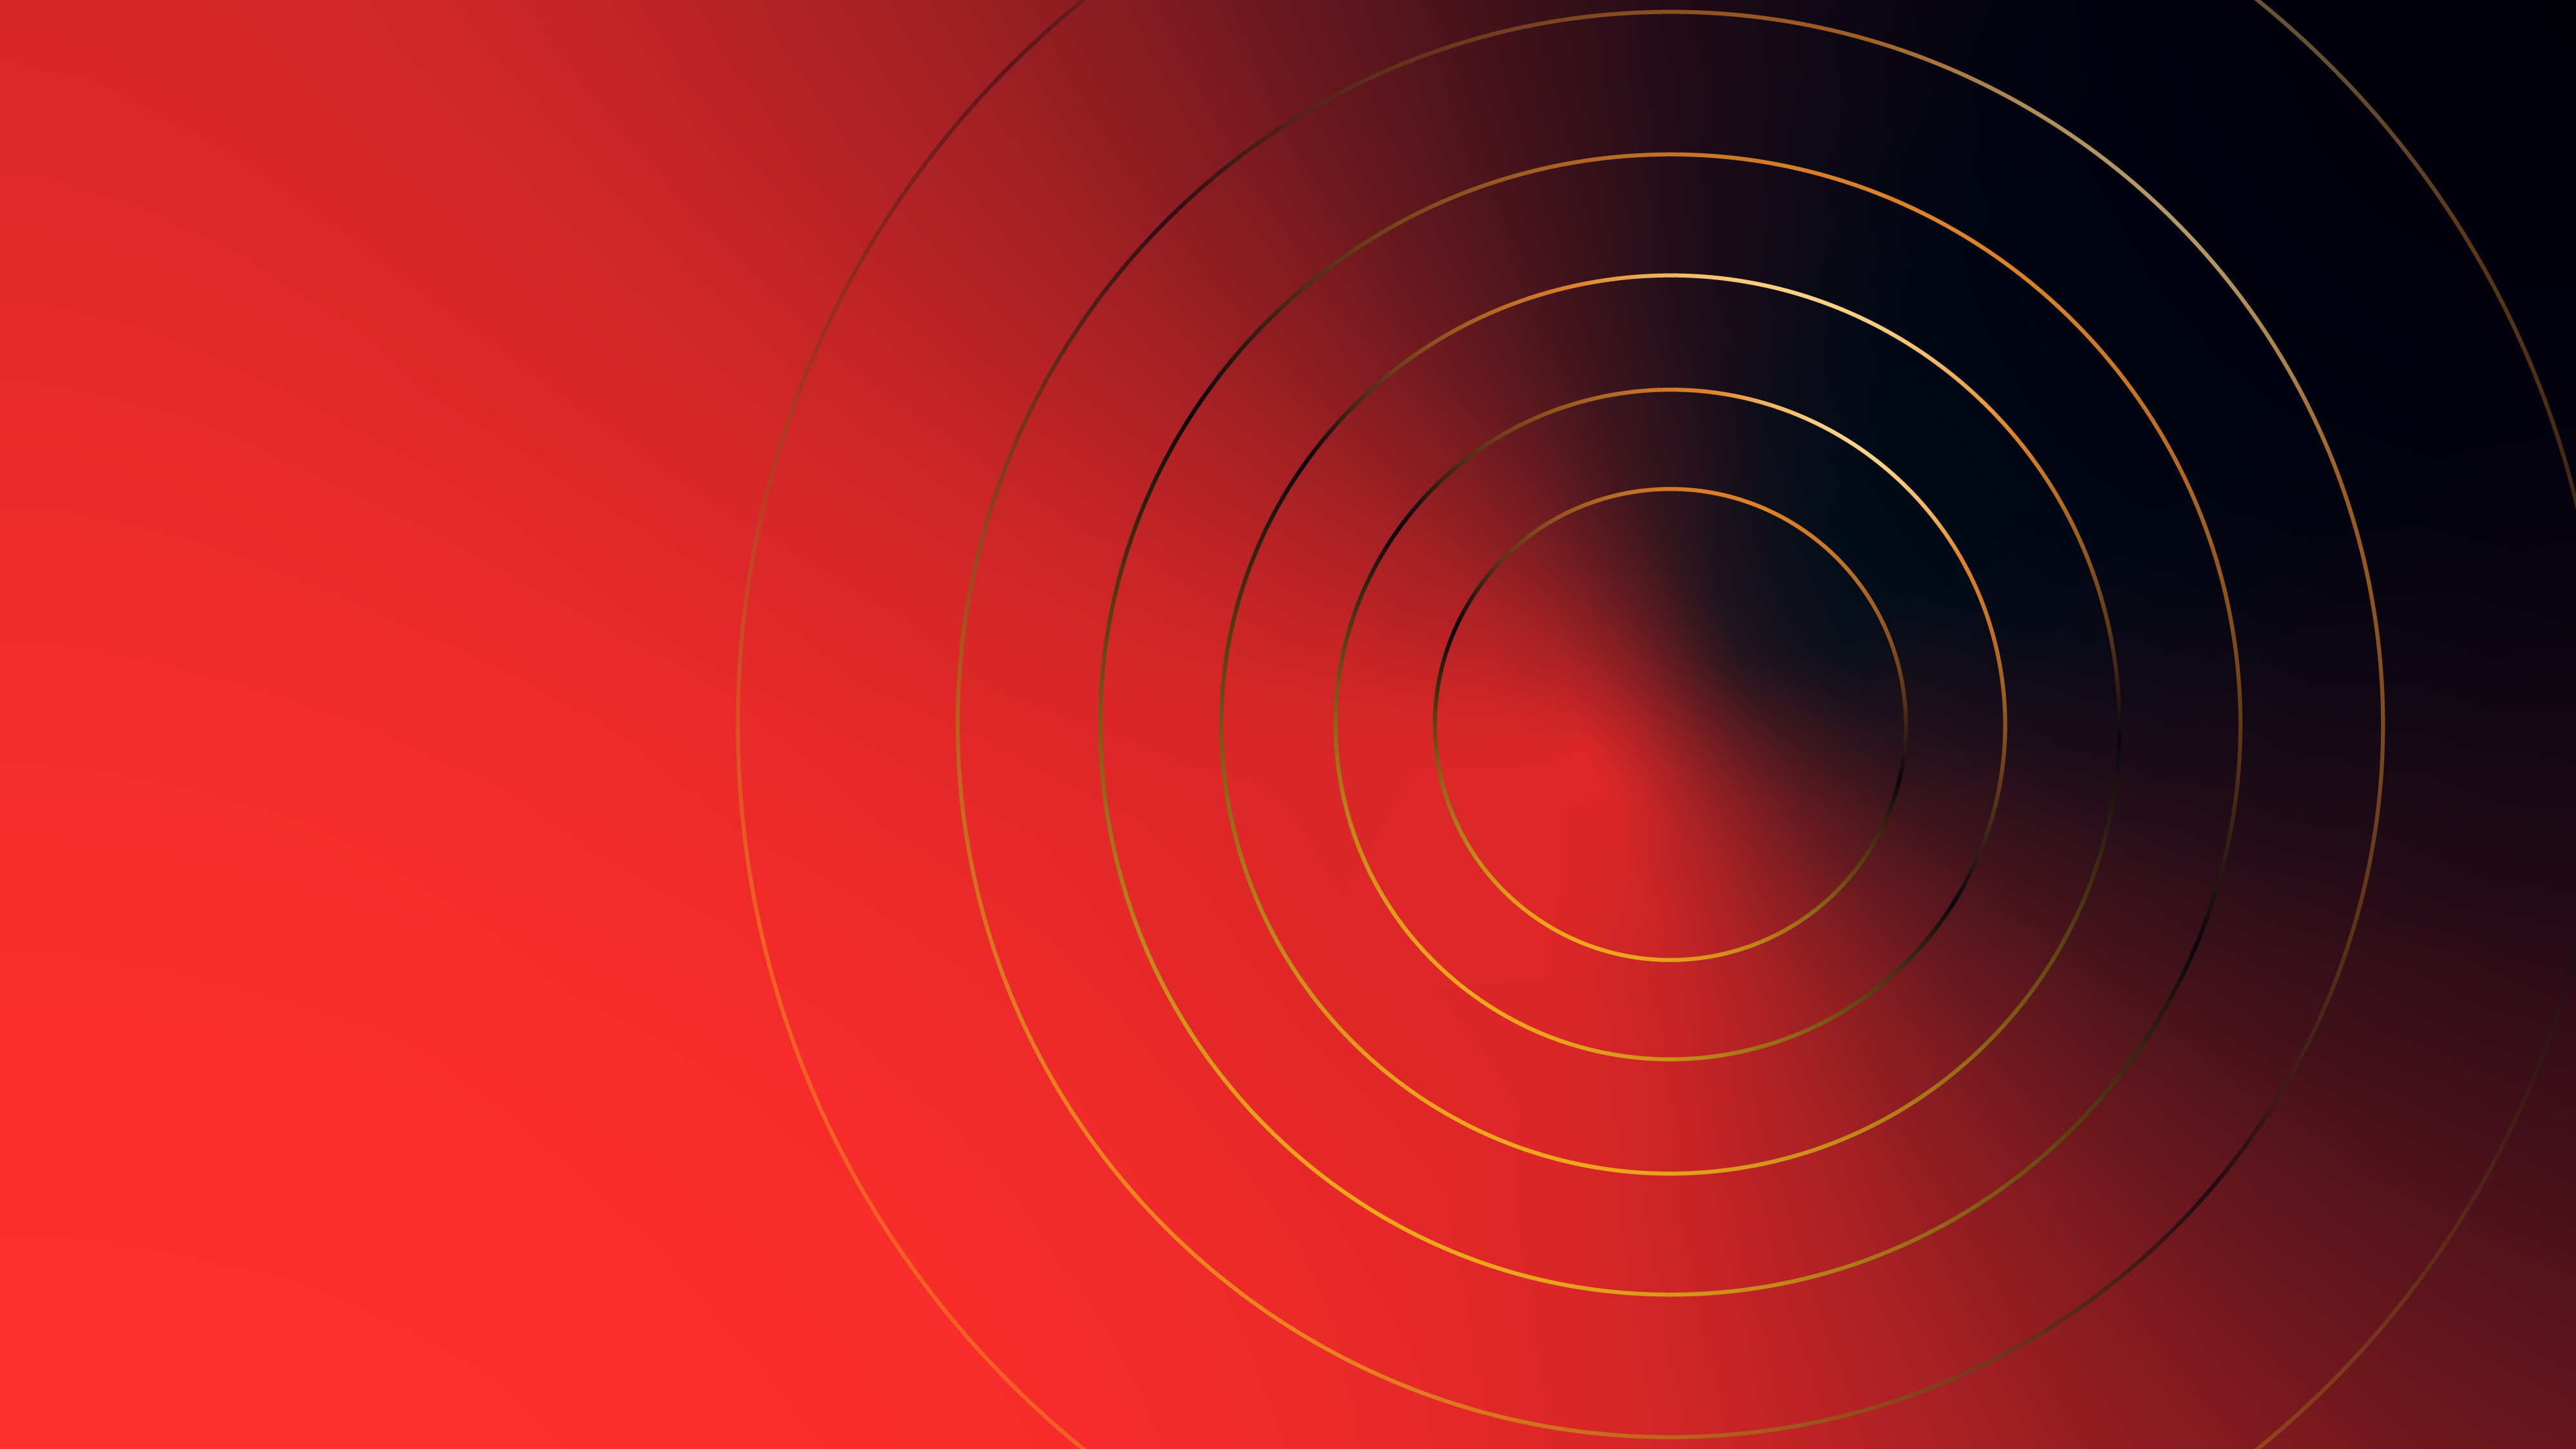 Circles on a red gradient background